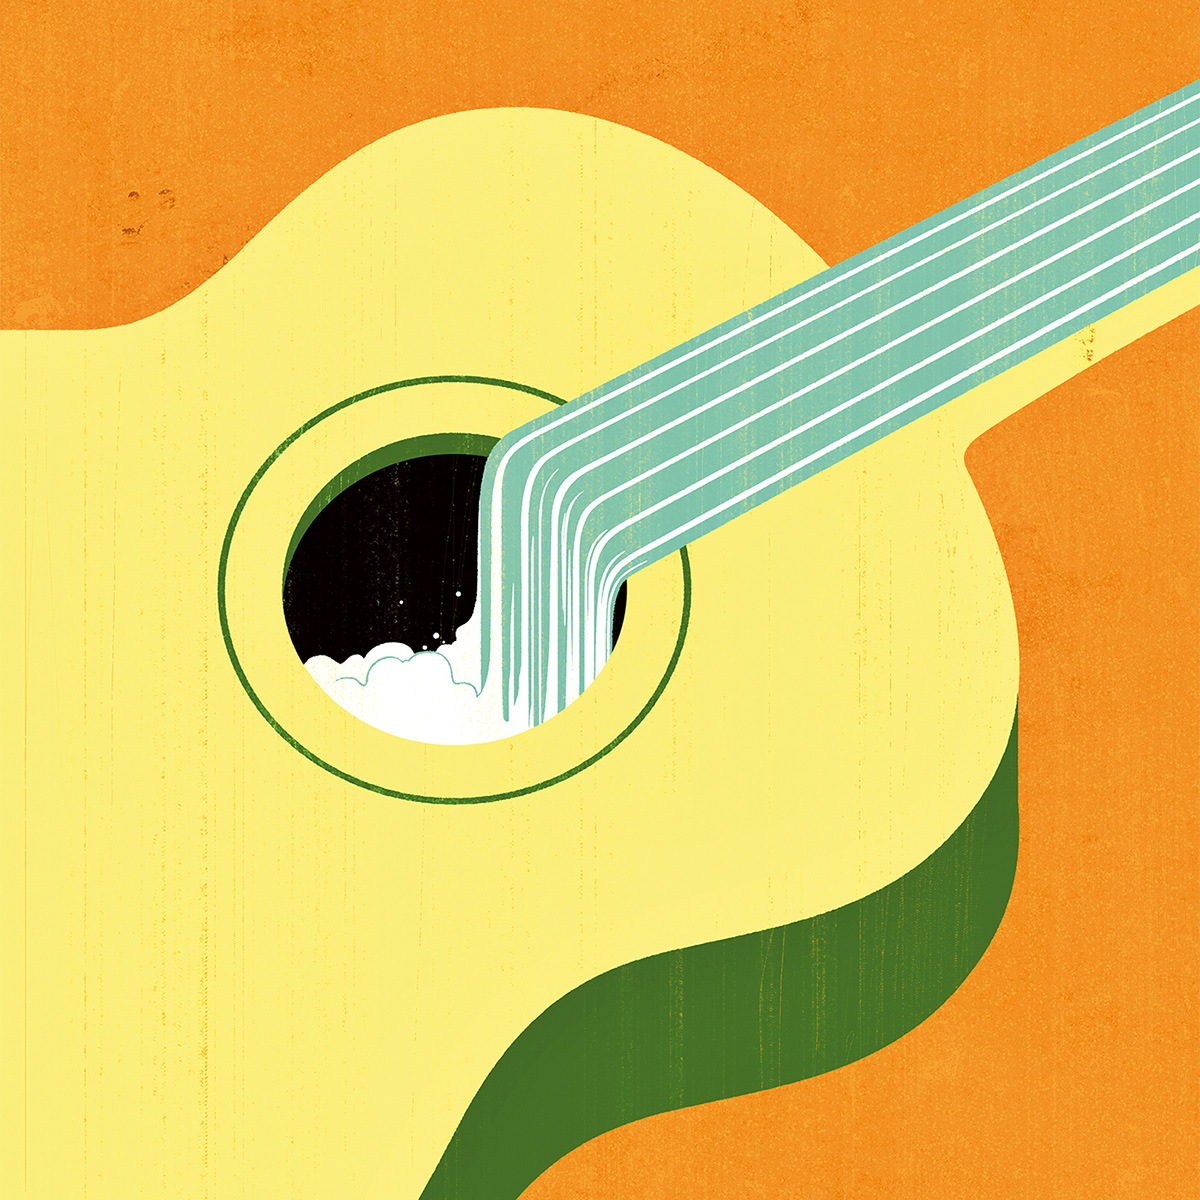 Illustration of guitar strings becoming a waterfall